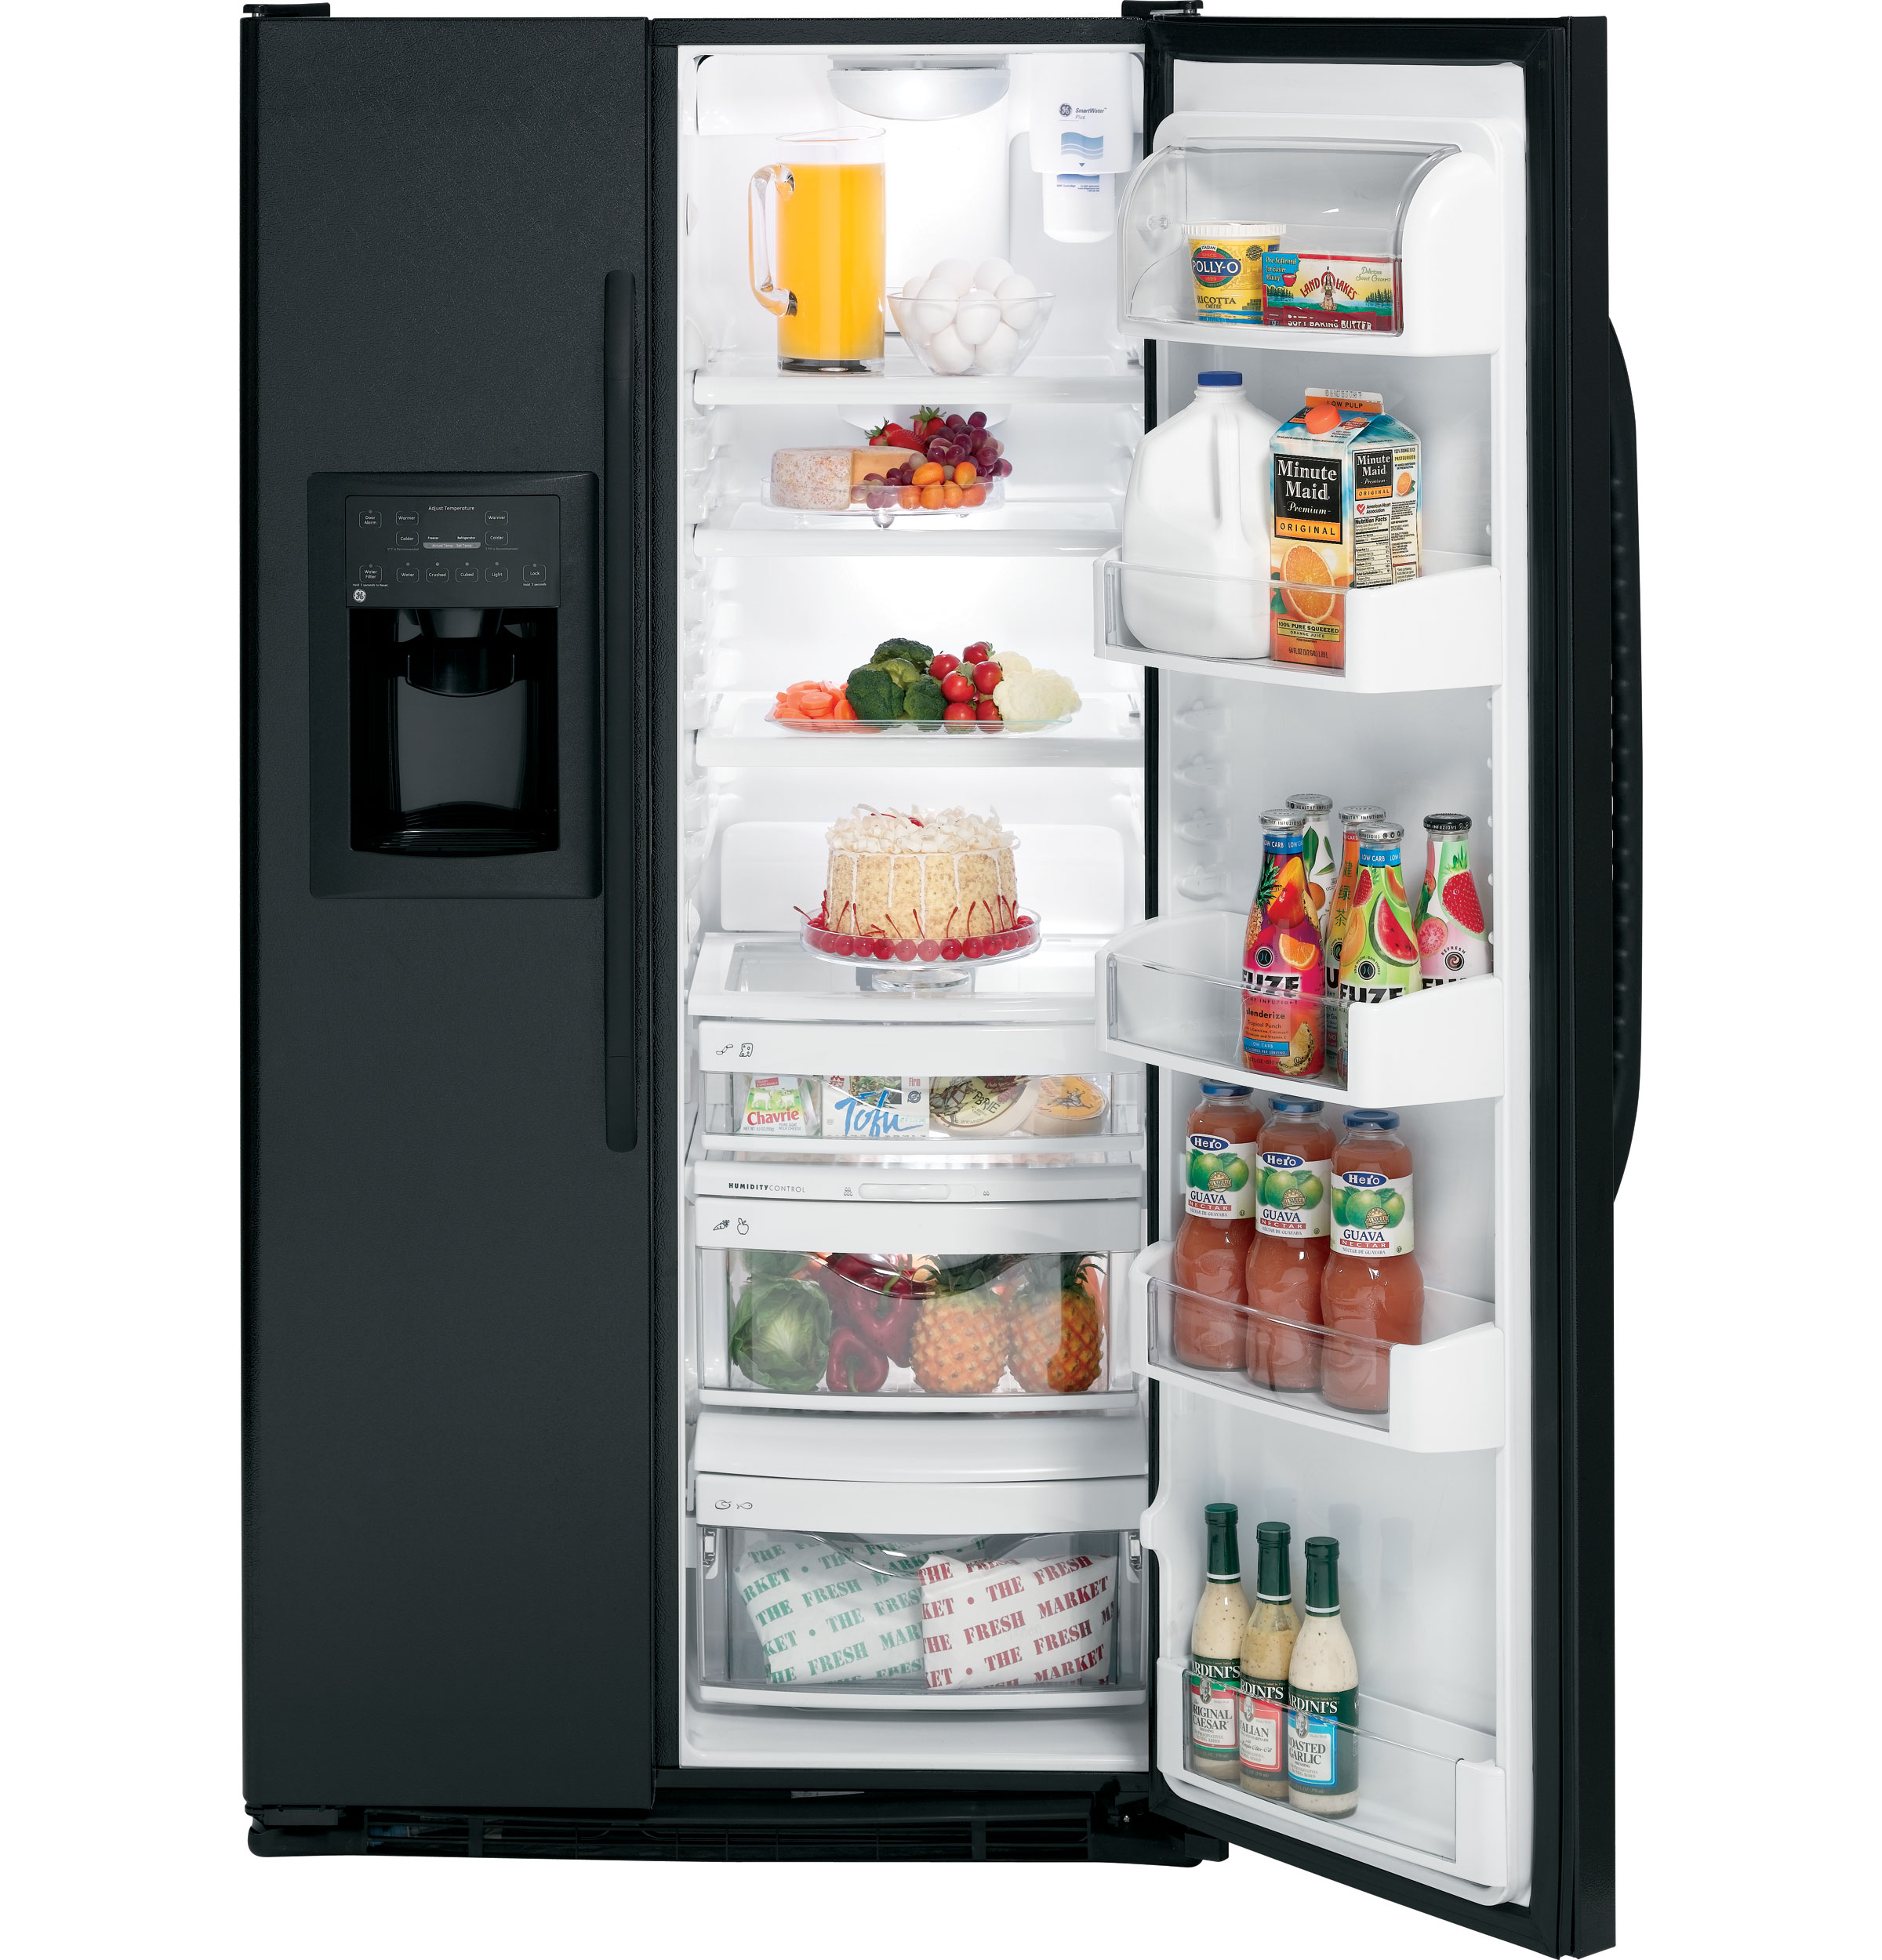 GE® Counter-Depth 22.1 Cu. Ft. Side-By-Side Refrigerator with Dispenser